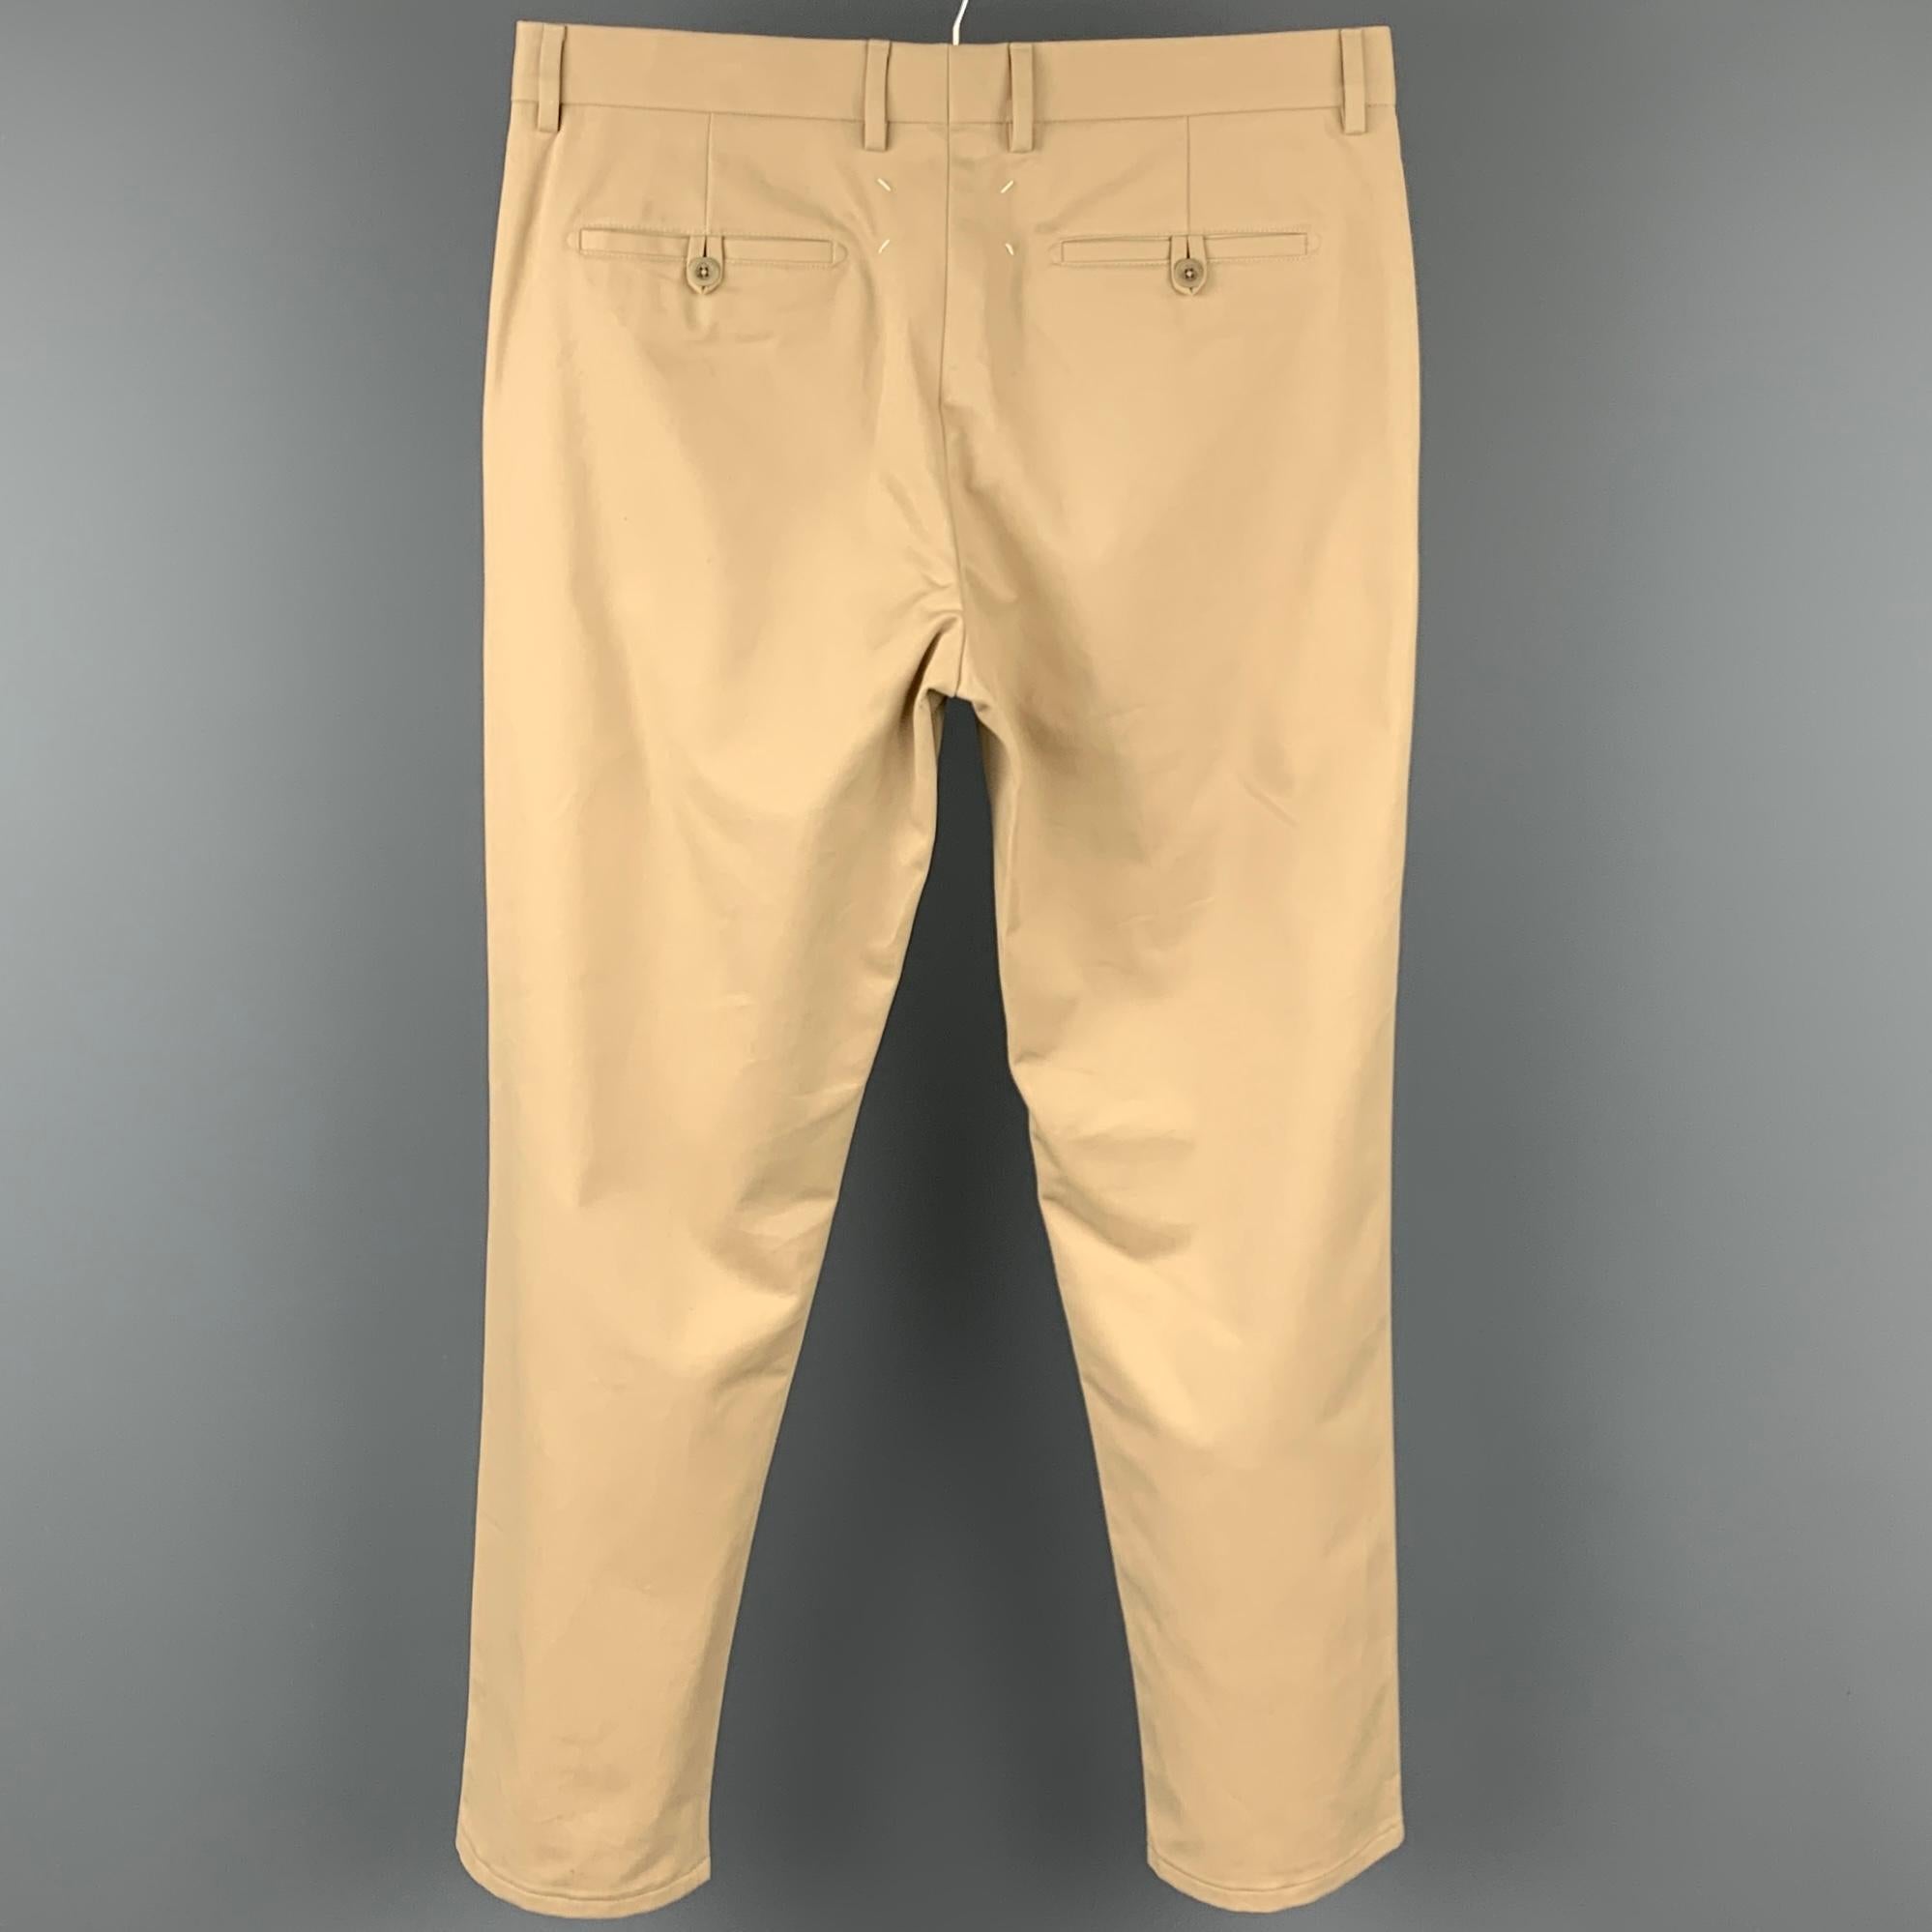 MAISON MARTIN MARGIELA casual pants comes in a khaki cotton featuring a straight leg, slit pockets, and a zip fly closure. Made in Romania.

New With Tags. 
Marked: 50

Measurements:

Waist: 36 in.
Rise: 11 in.
Inseam: 30 in